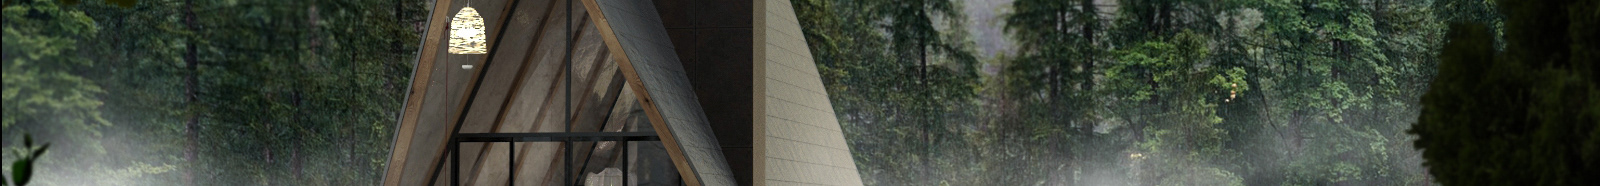 Angy Architecture's profile banner